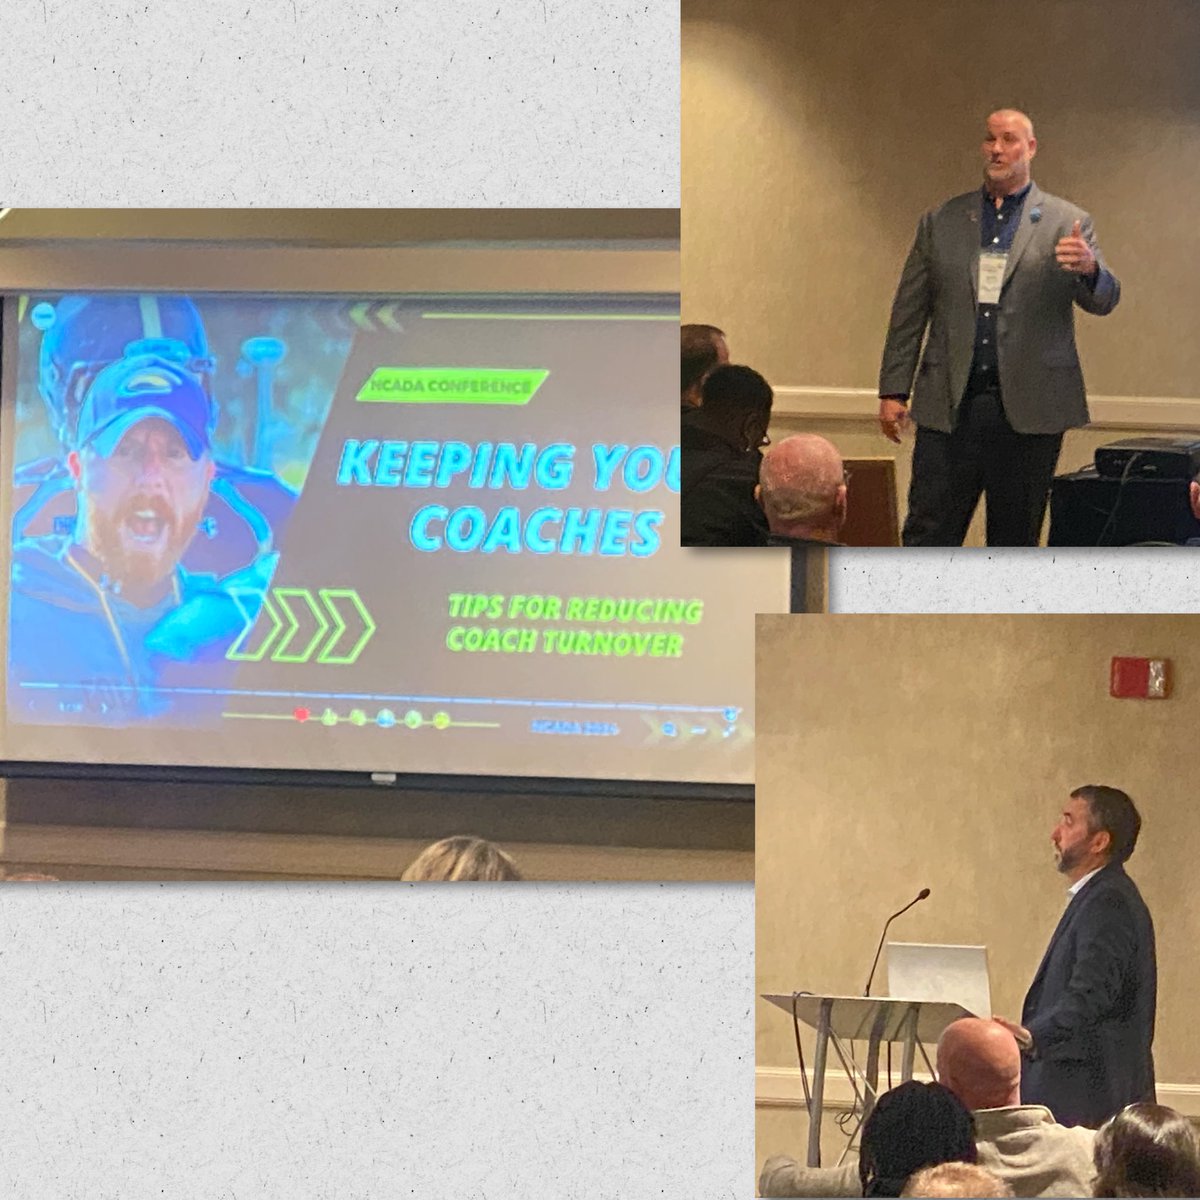 Our @CMSAthletic1 ADs @EMeckAthletics Coach Fowler and @HopewellAD Coach Bourque presenting at State @NCADA1970 Conference